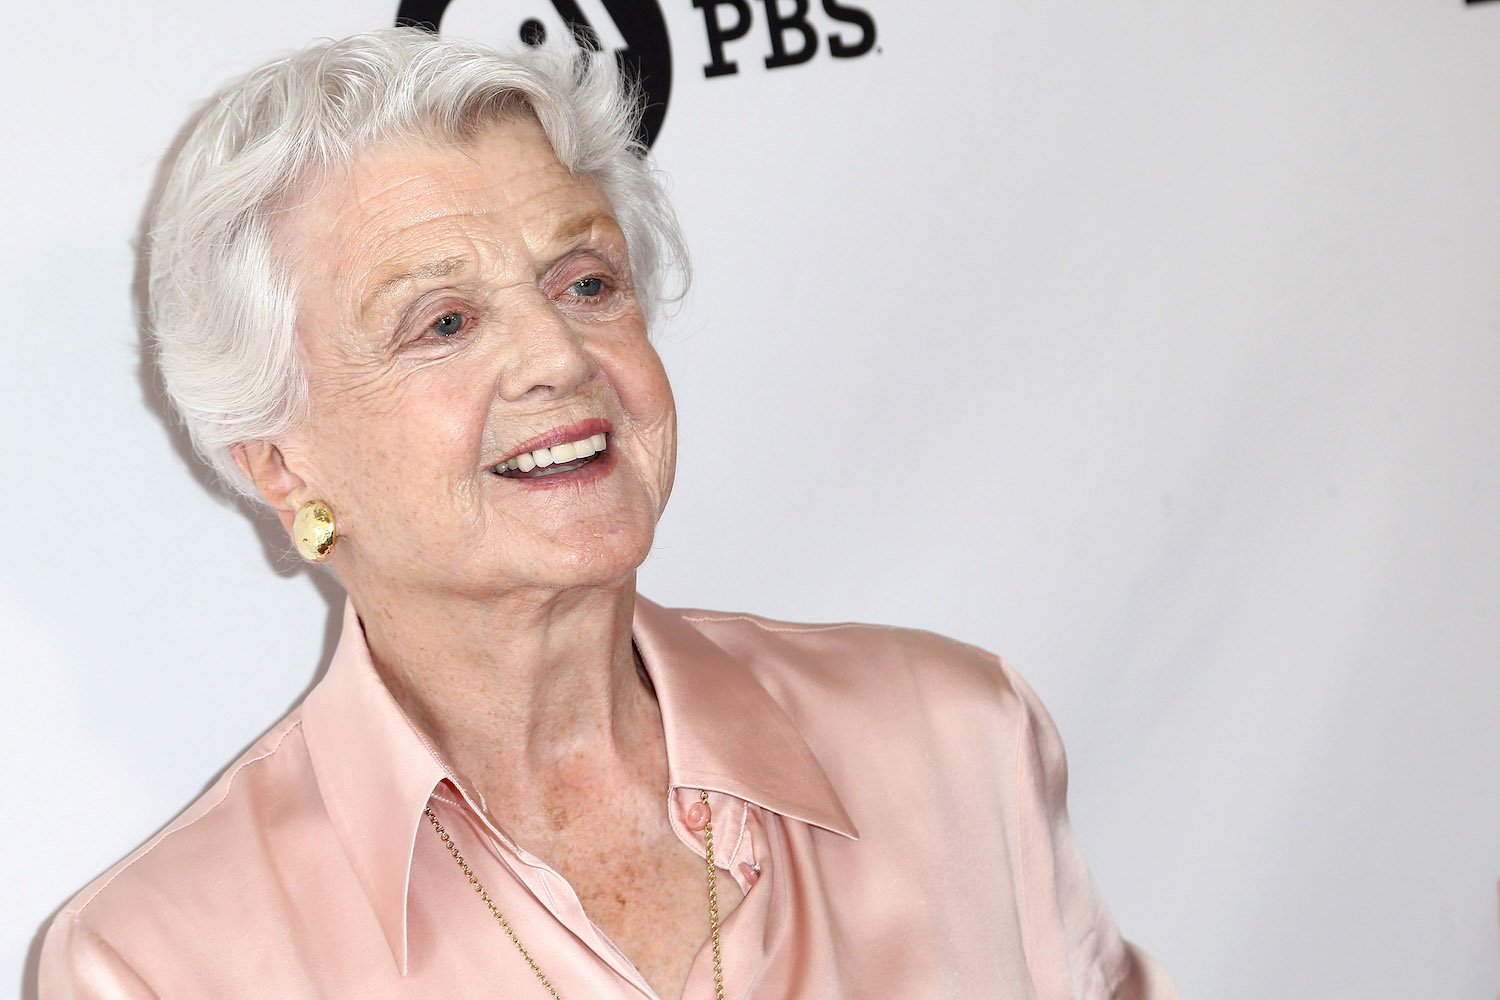 Angela Lansbury wearing a light peach colored top. Angela Lansbury dead in 2022.